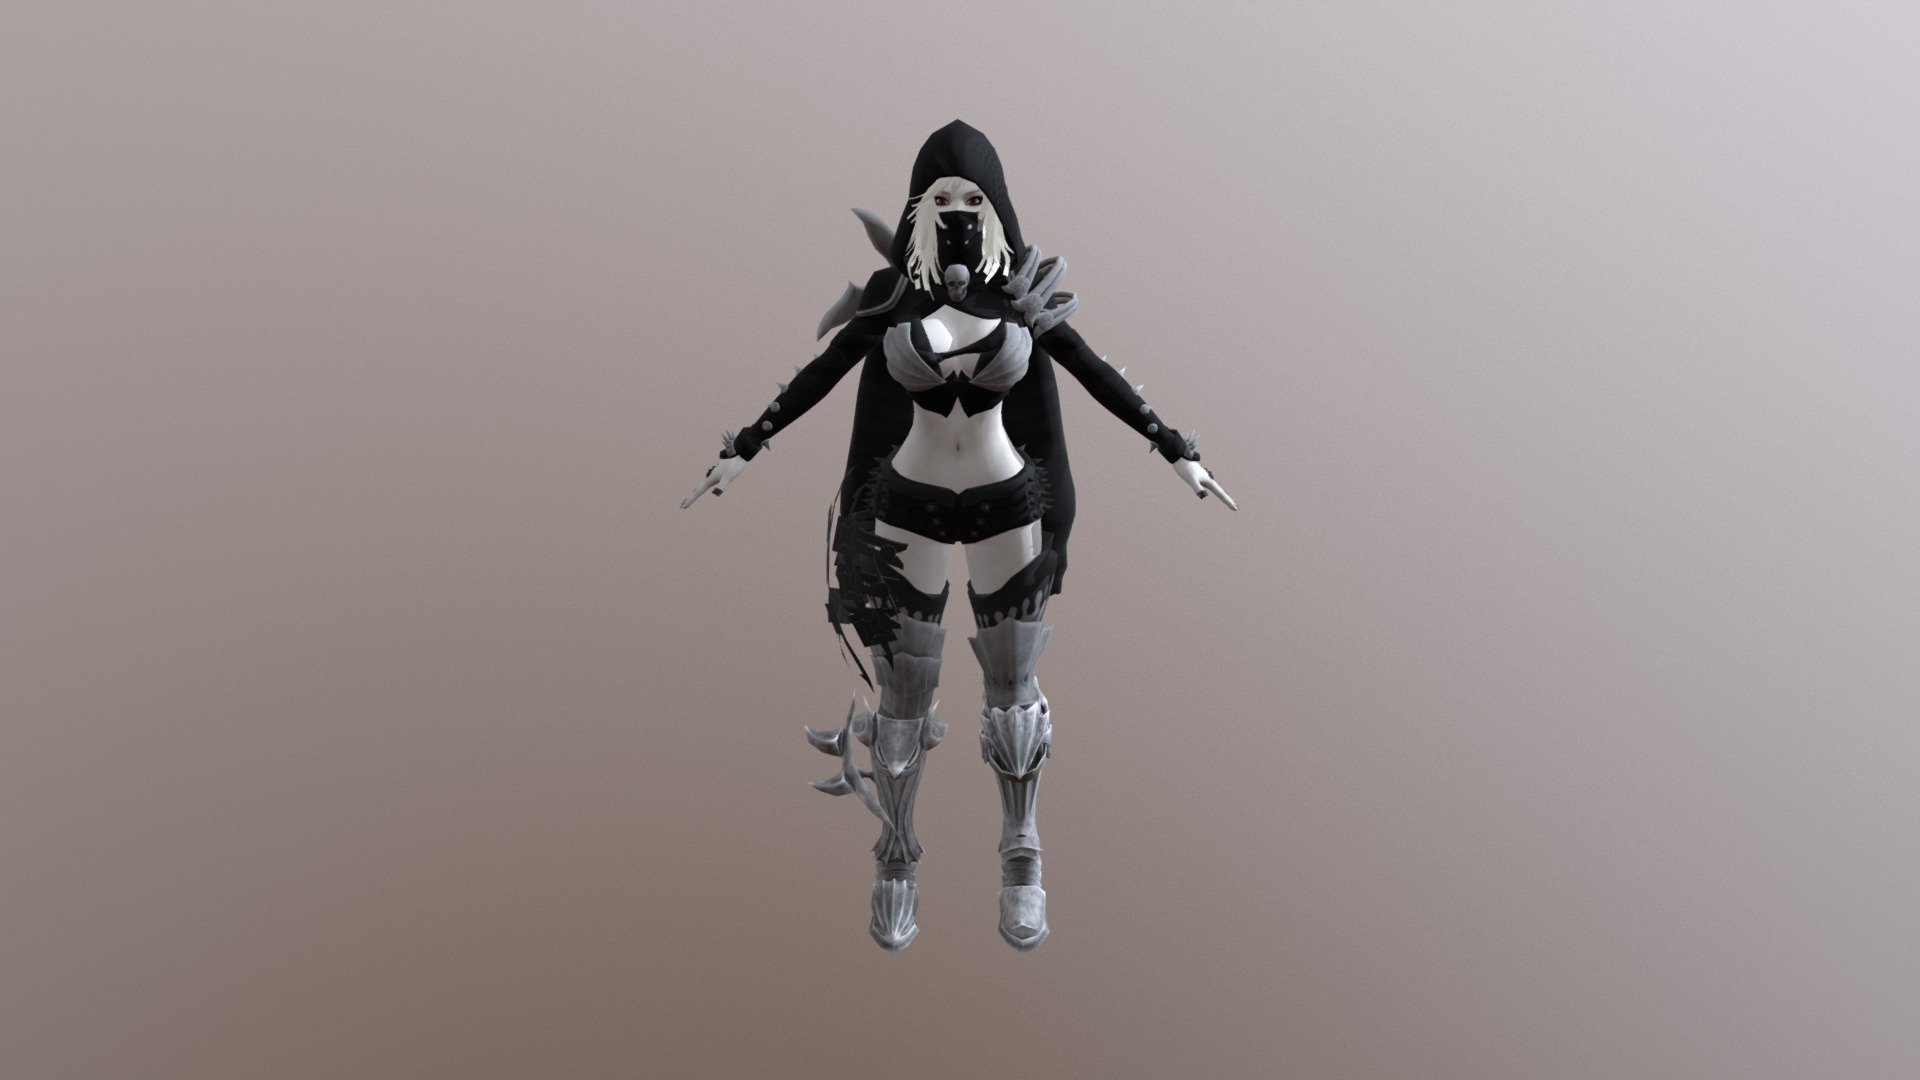 Vampire Vella in Lightwind outfit from, Vindictus. Models/Textures designed by Nexon/Devcat. Character and outfit model designs put together into a survivor model in Left 4 Dead 2.

3D model preview for Steam Workshop 3d model